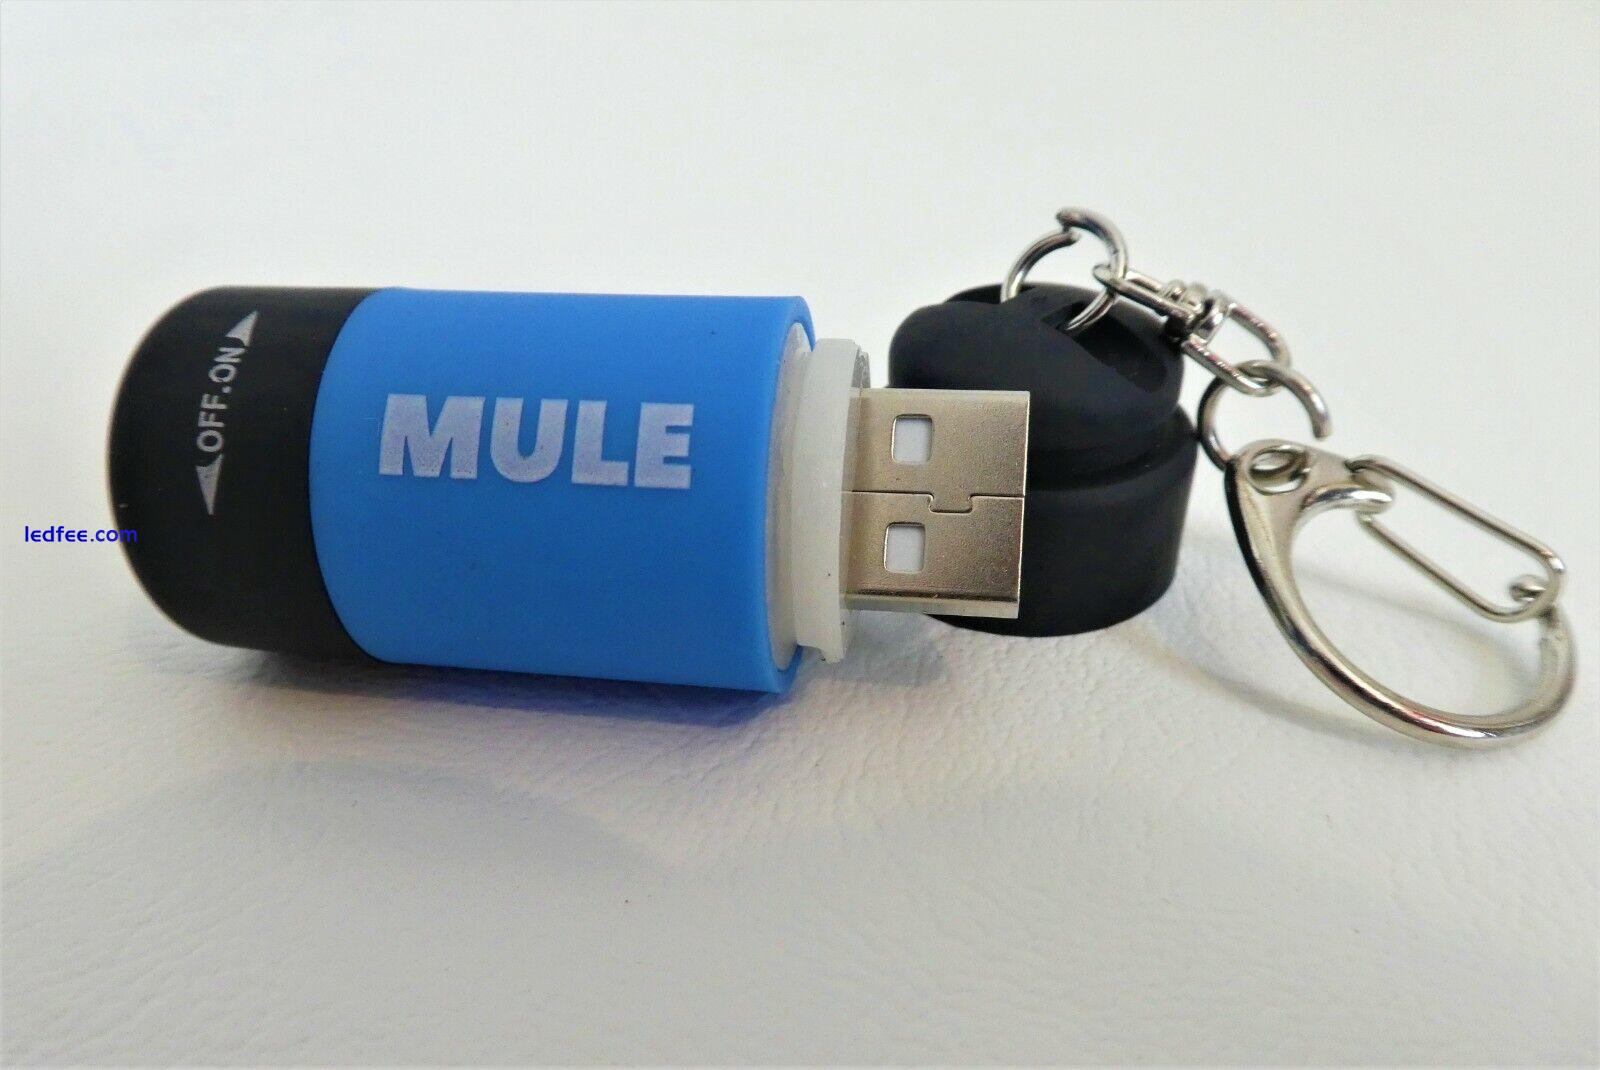 MULE Blue USB Rechargeable water resistant inspection torch key-ring EDC 4 